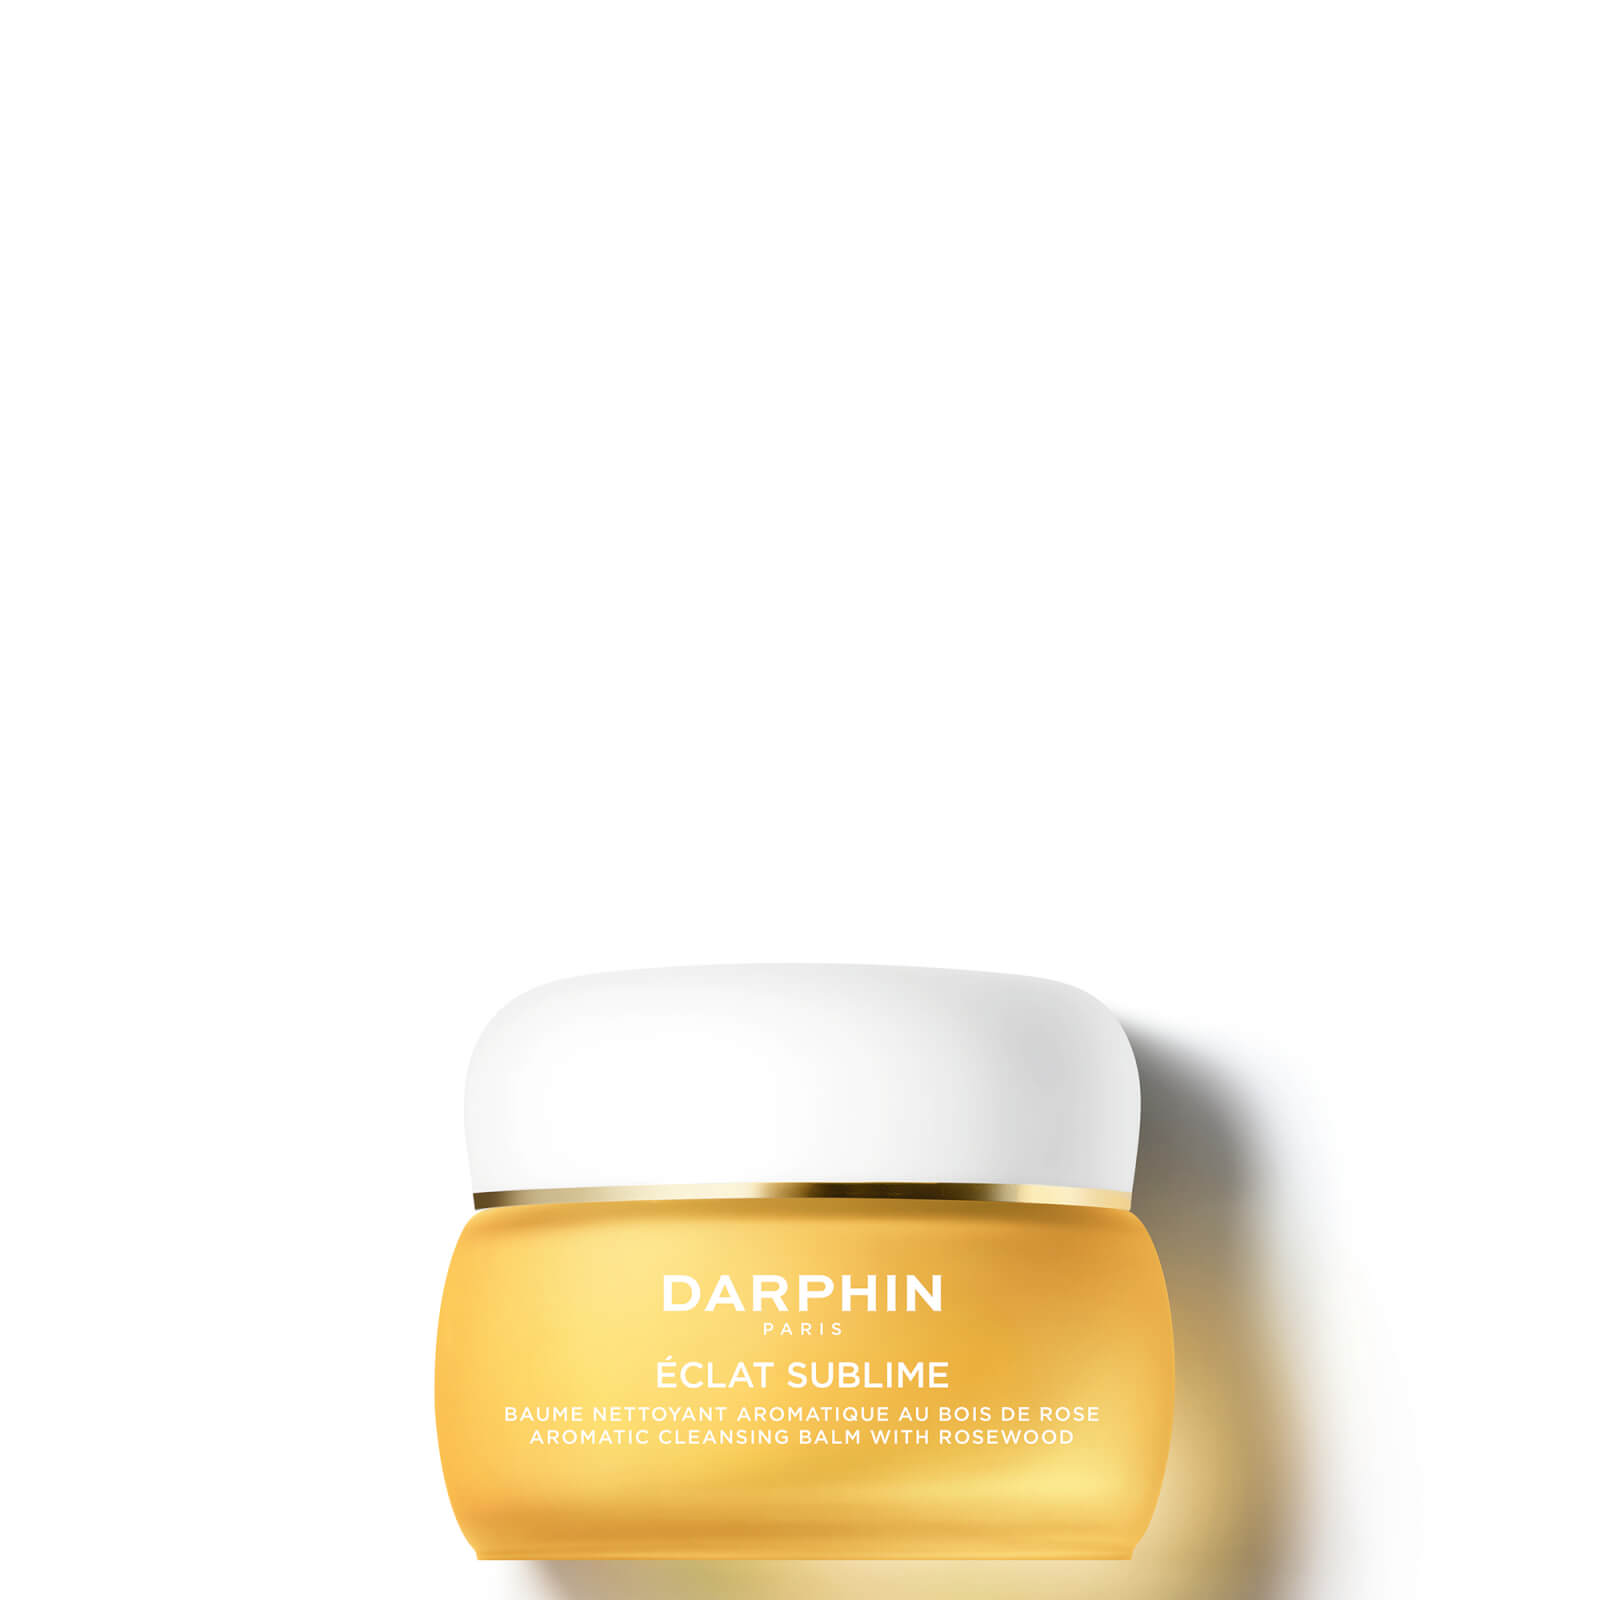 Photos - Facial / Body Cleansing Product Darphin Éclat Sublime Aromatic Cleansing Balm and 8-Flower Golden Nectar 1 